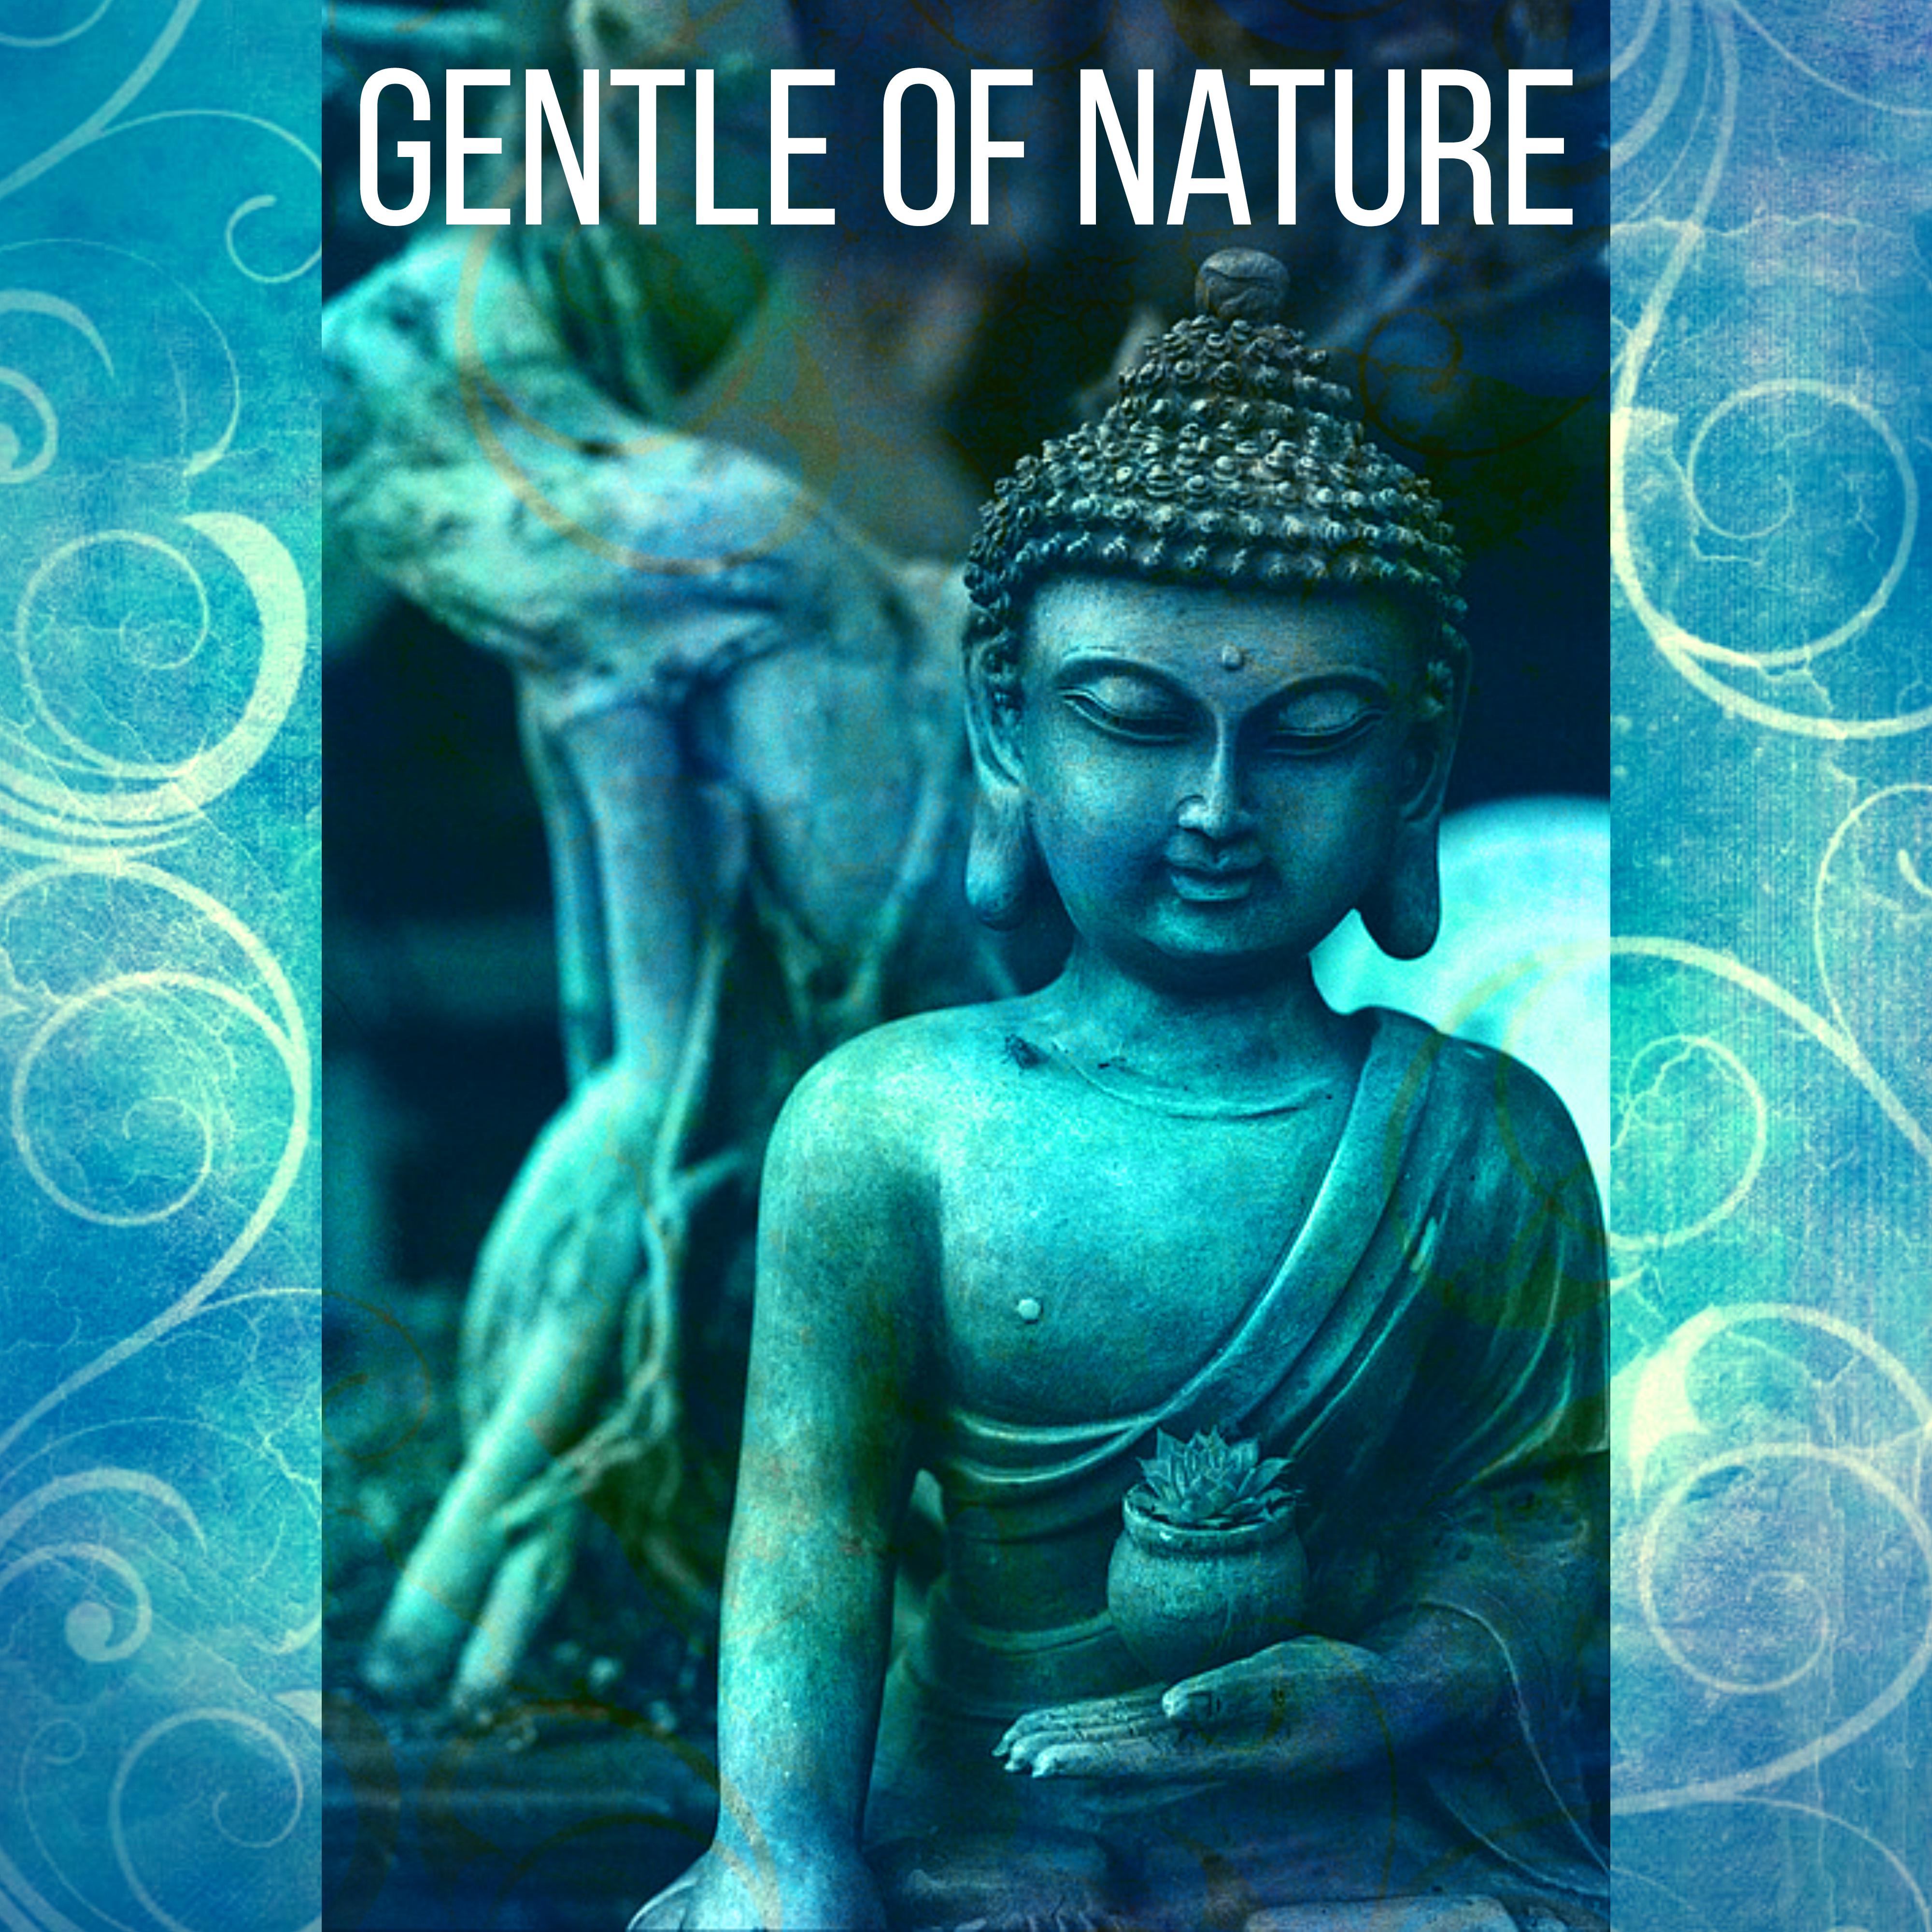 Gentle of Nature  Twitter, Pure Energy, Fresh, Clean Air, Joy, Frame of Mind, Heaven